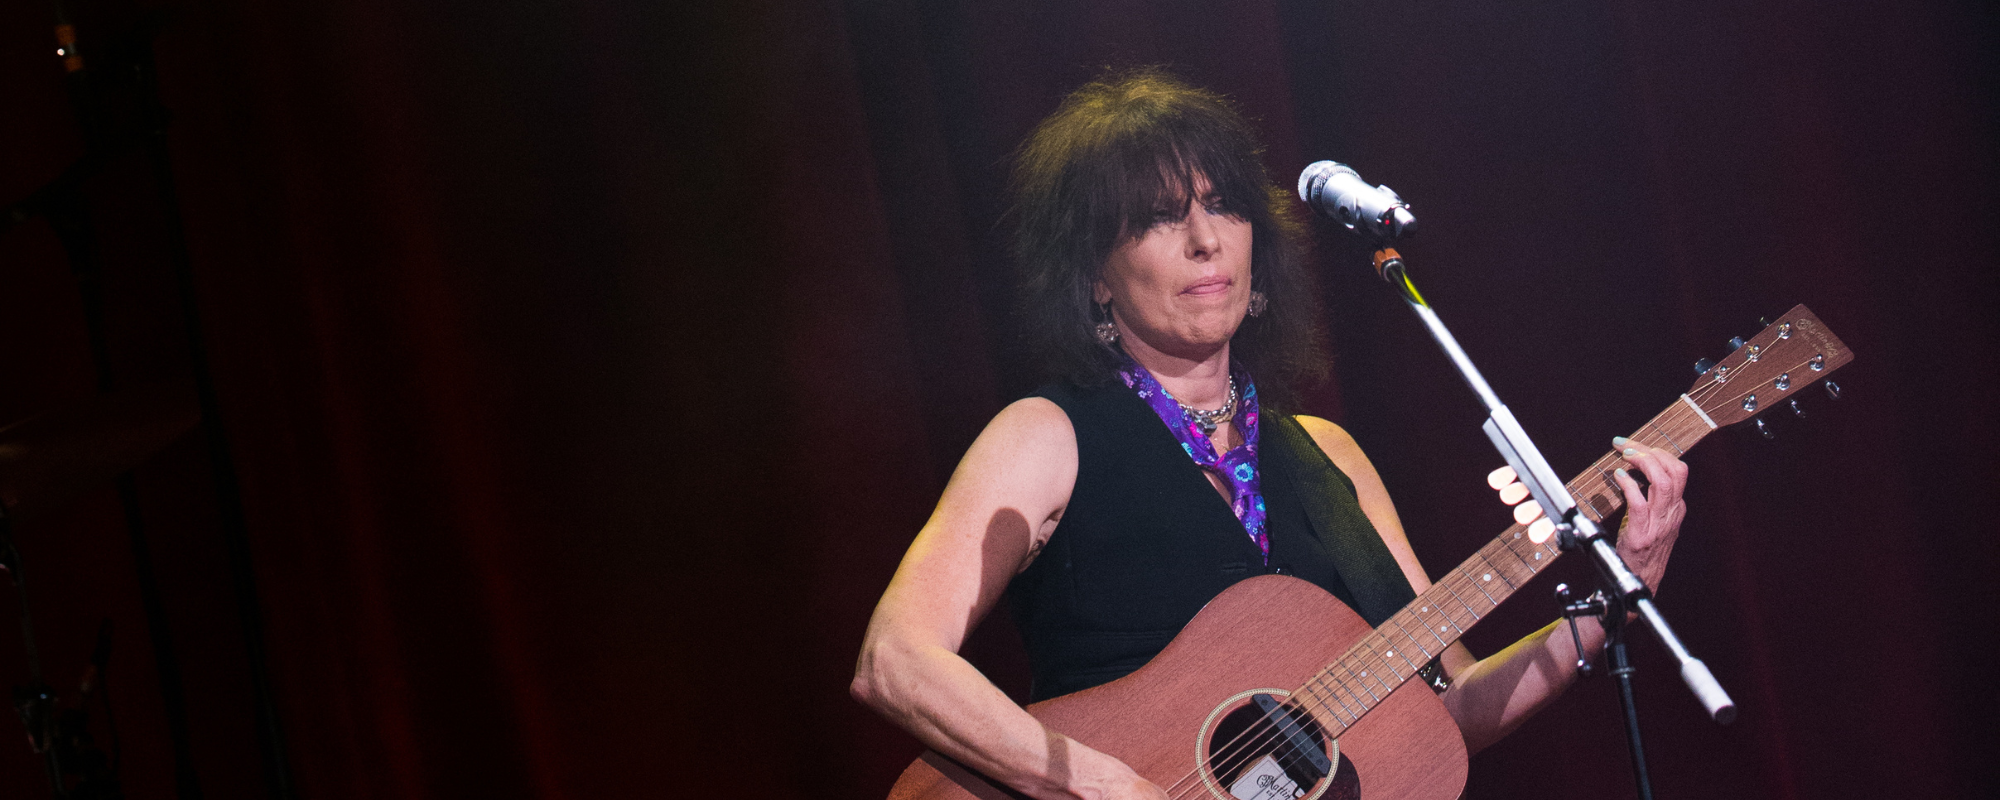 The Tao of Chrissie Hynde: The Meaning Behind “Middle of the Road” by The Pretenders